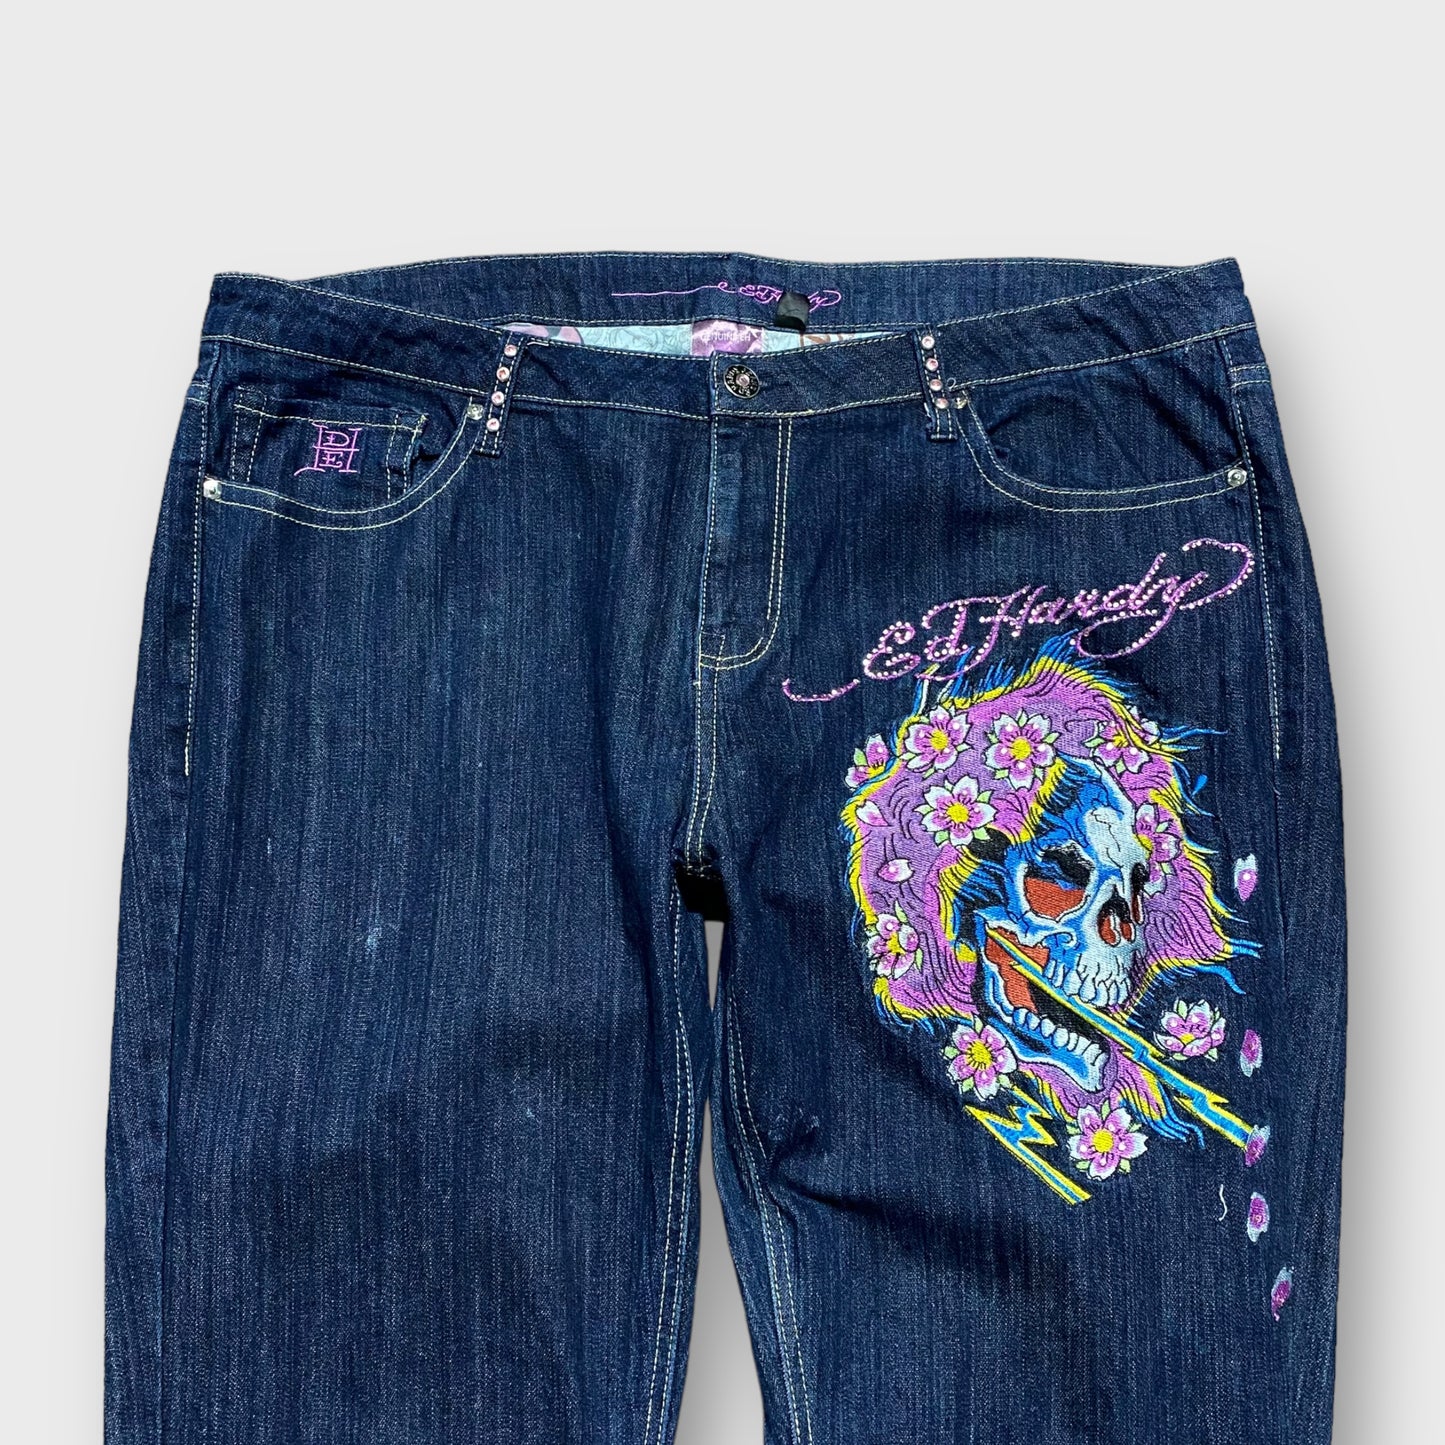 "Ed Hardy" Tapered silhouette denim pants